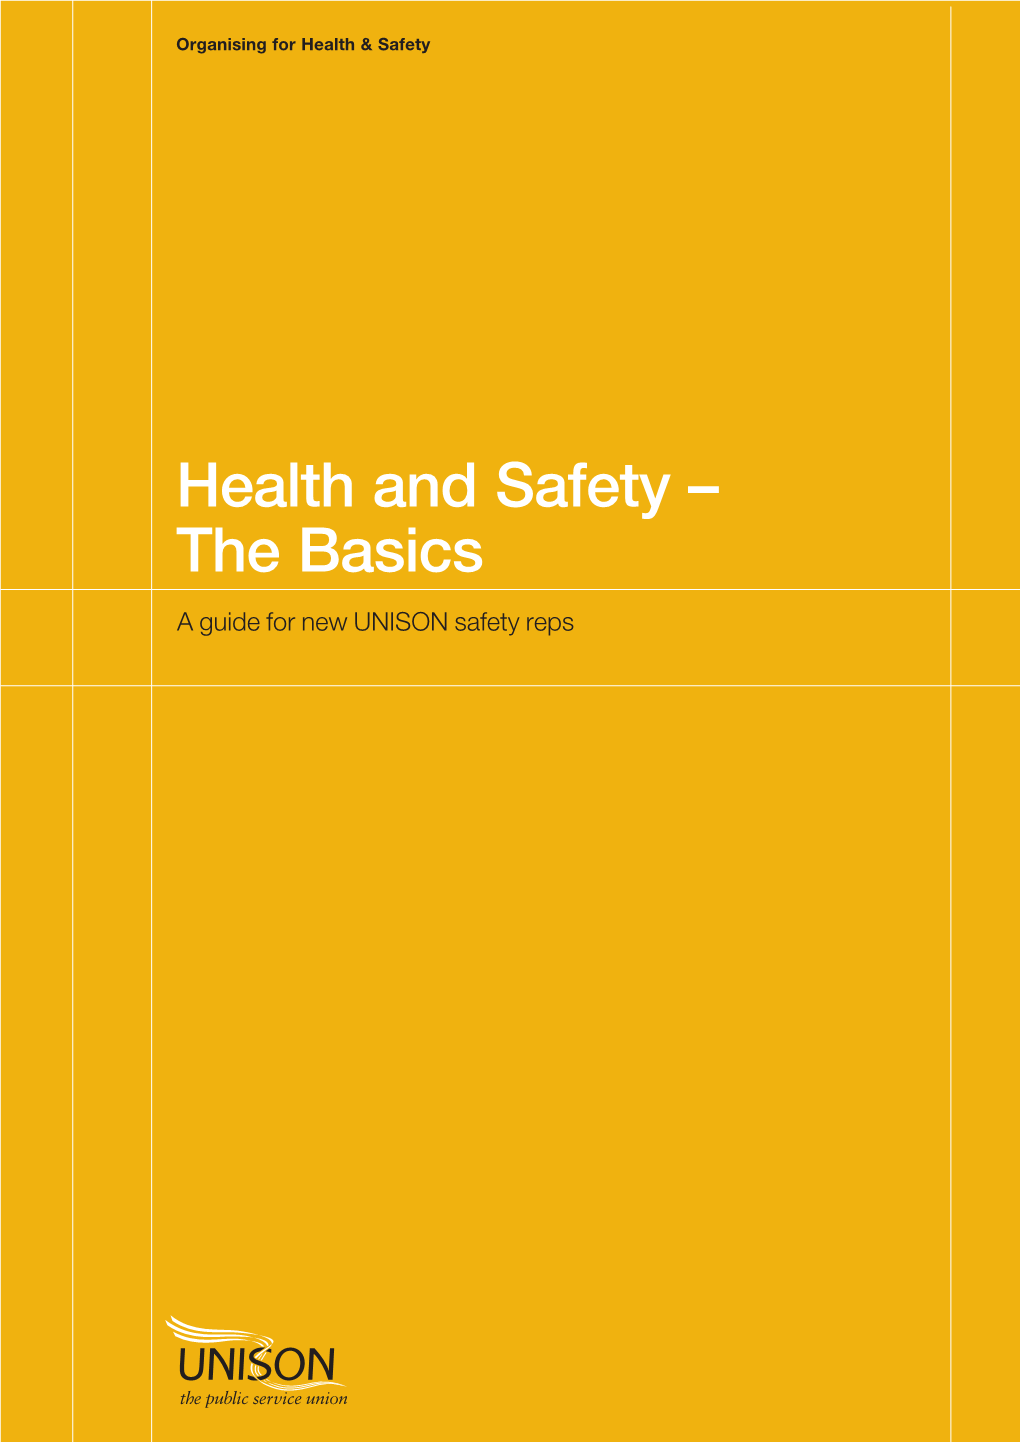 Health and Safety – the Basics a Guide for New UNISON Safety Reps UNISON’S Health and Safety Reps Guide